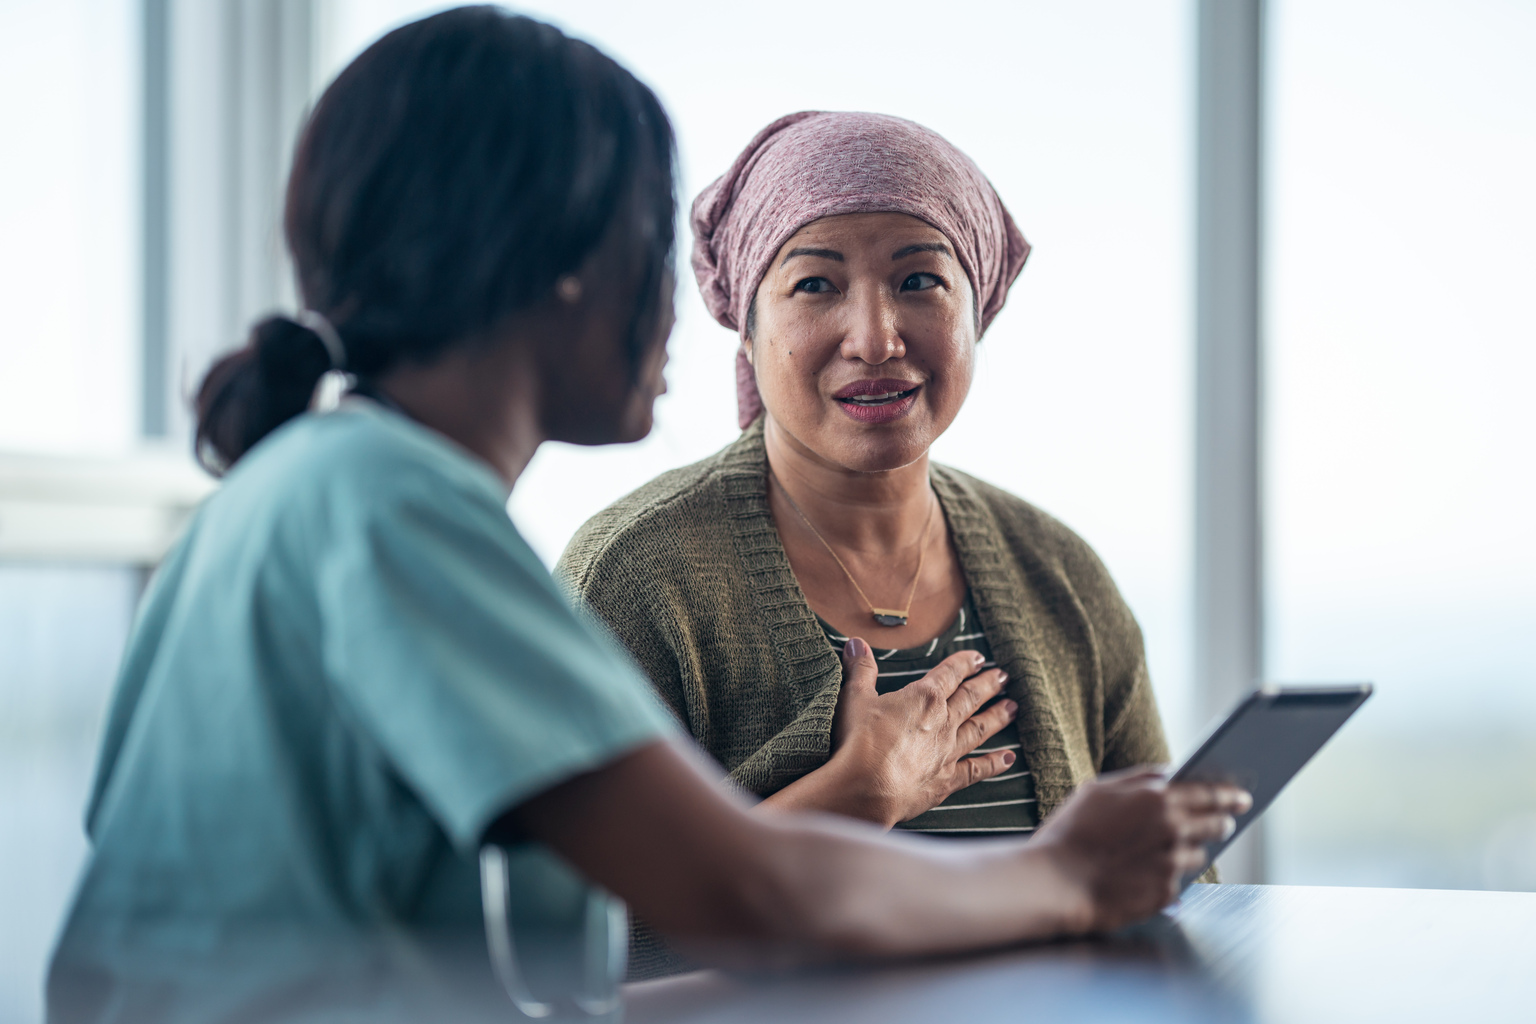 Asian woman with cancer meeting with African female physician